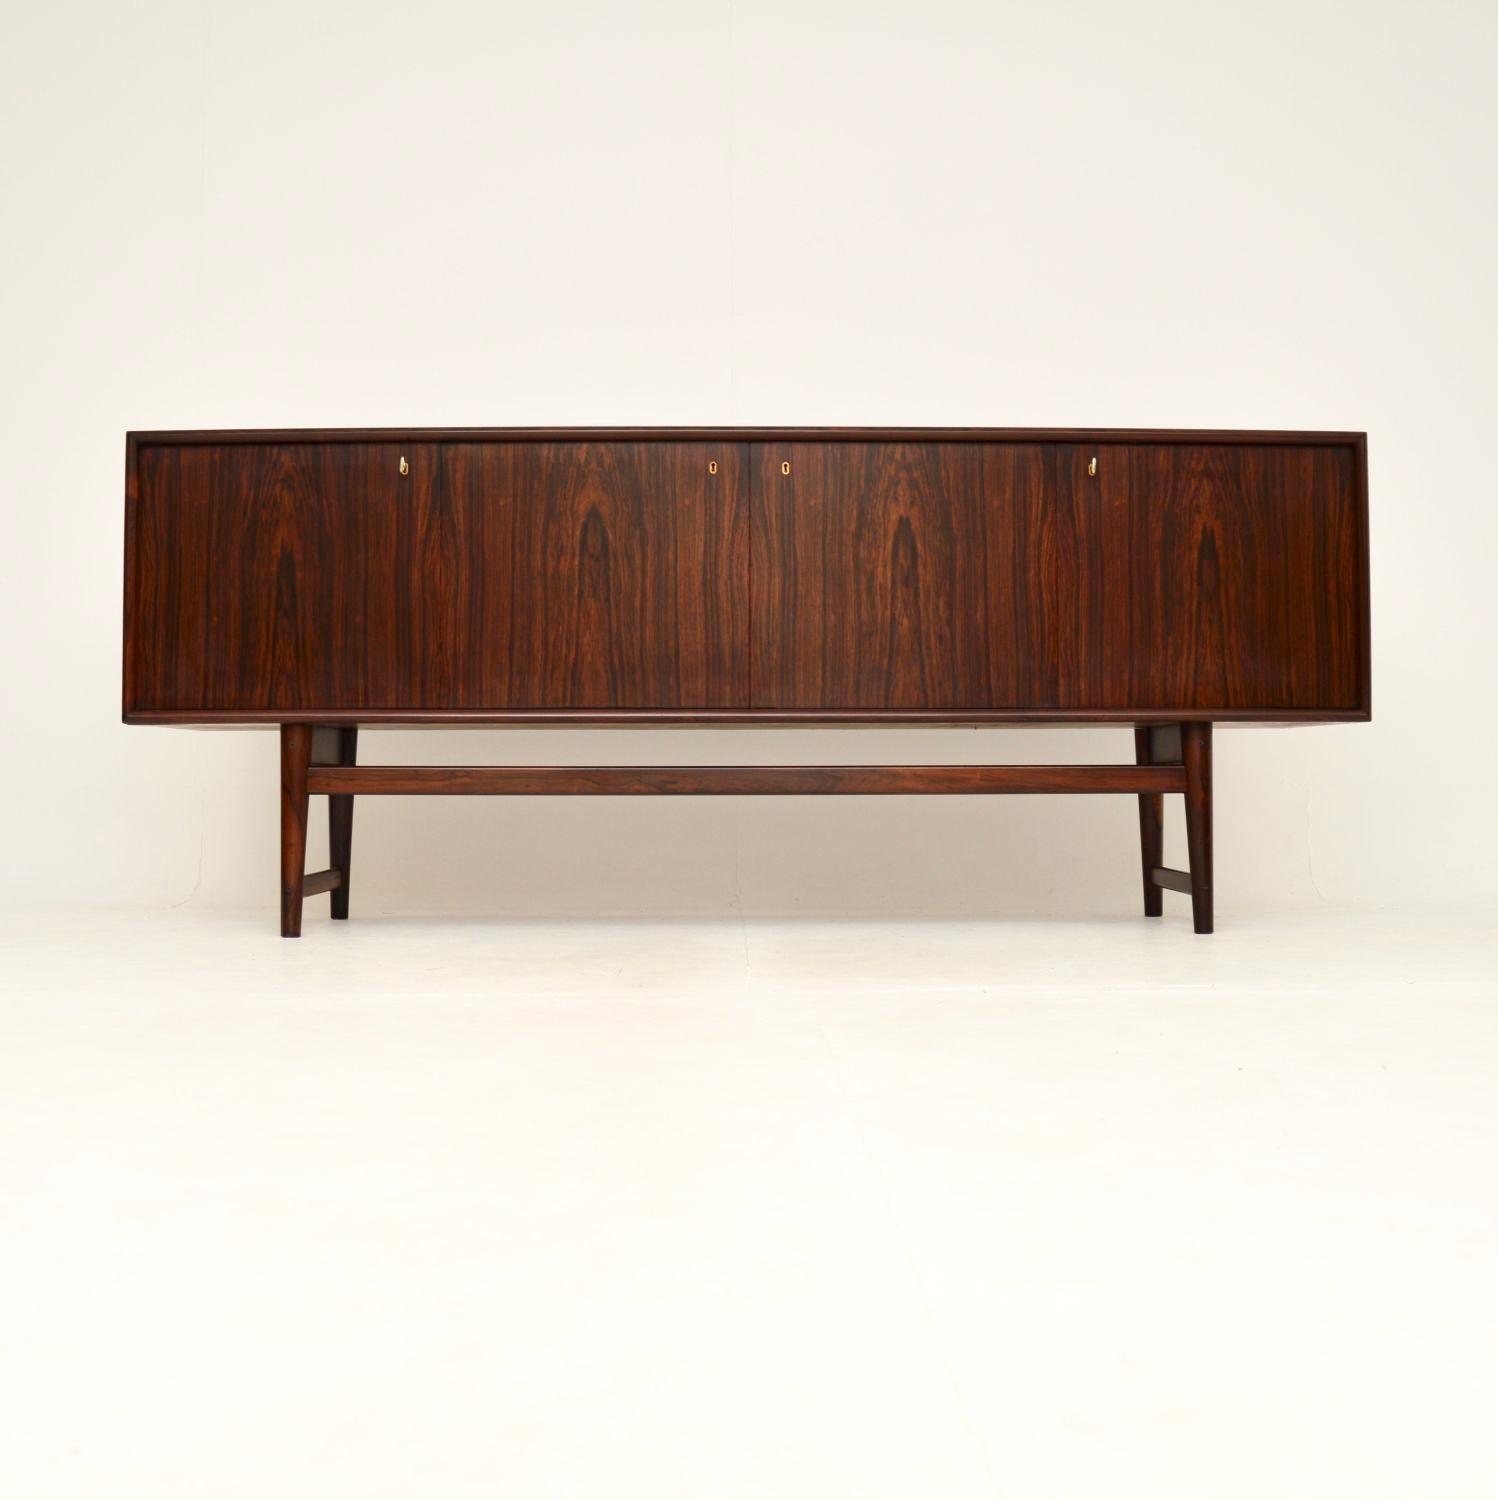 An absolutely stunning vintage Scandinavian sideboard of the highest order. This was made in Norway, it dates from the 1960’s.

The quality is outstanding, this is extremely well made with wonderful grain patterns and a gorgeous colour tone. The